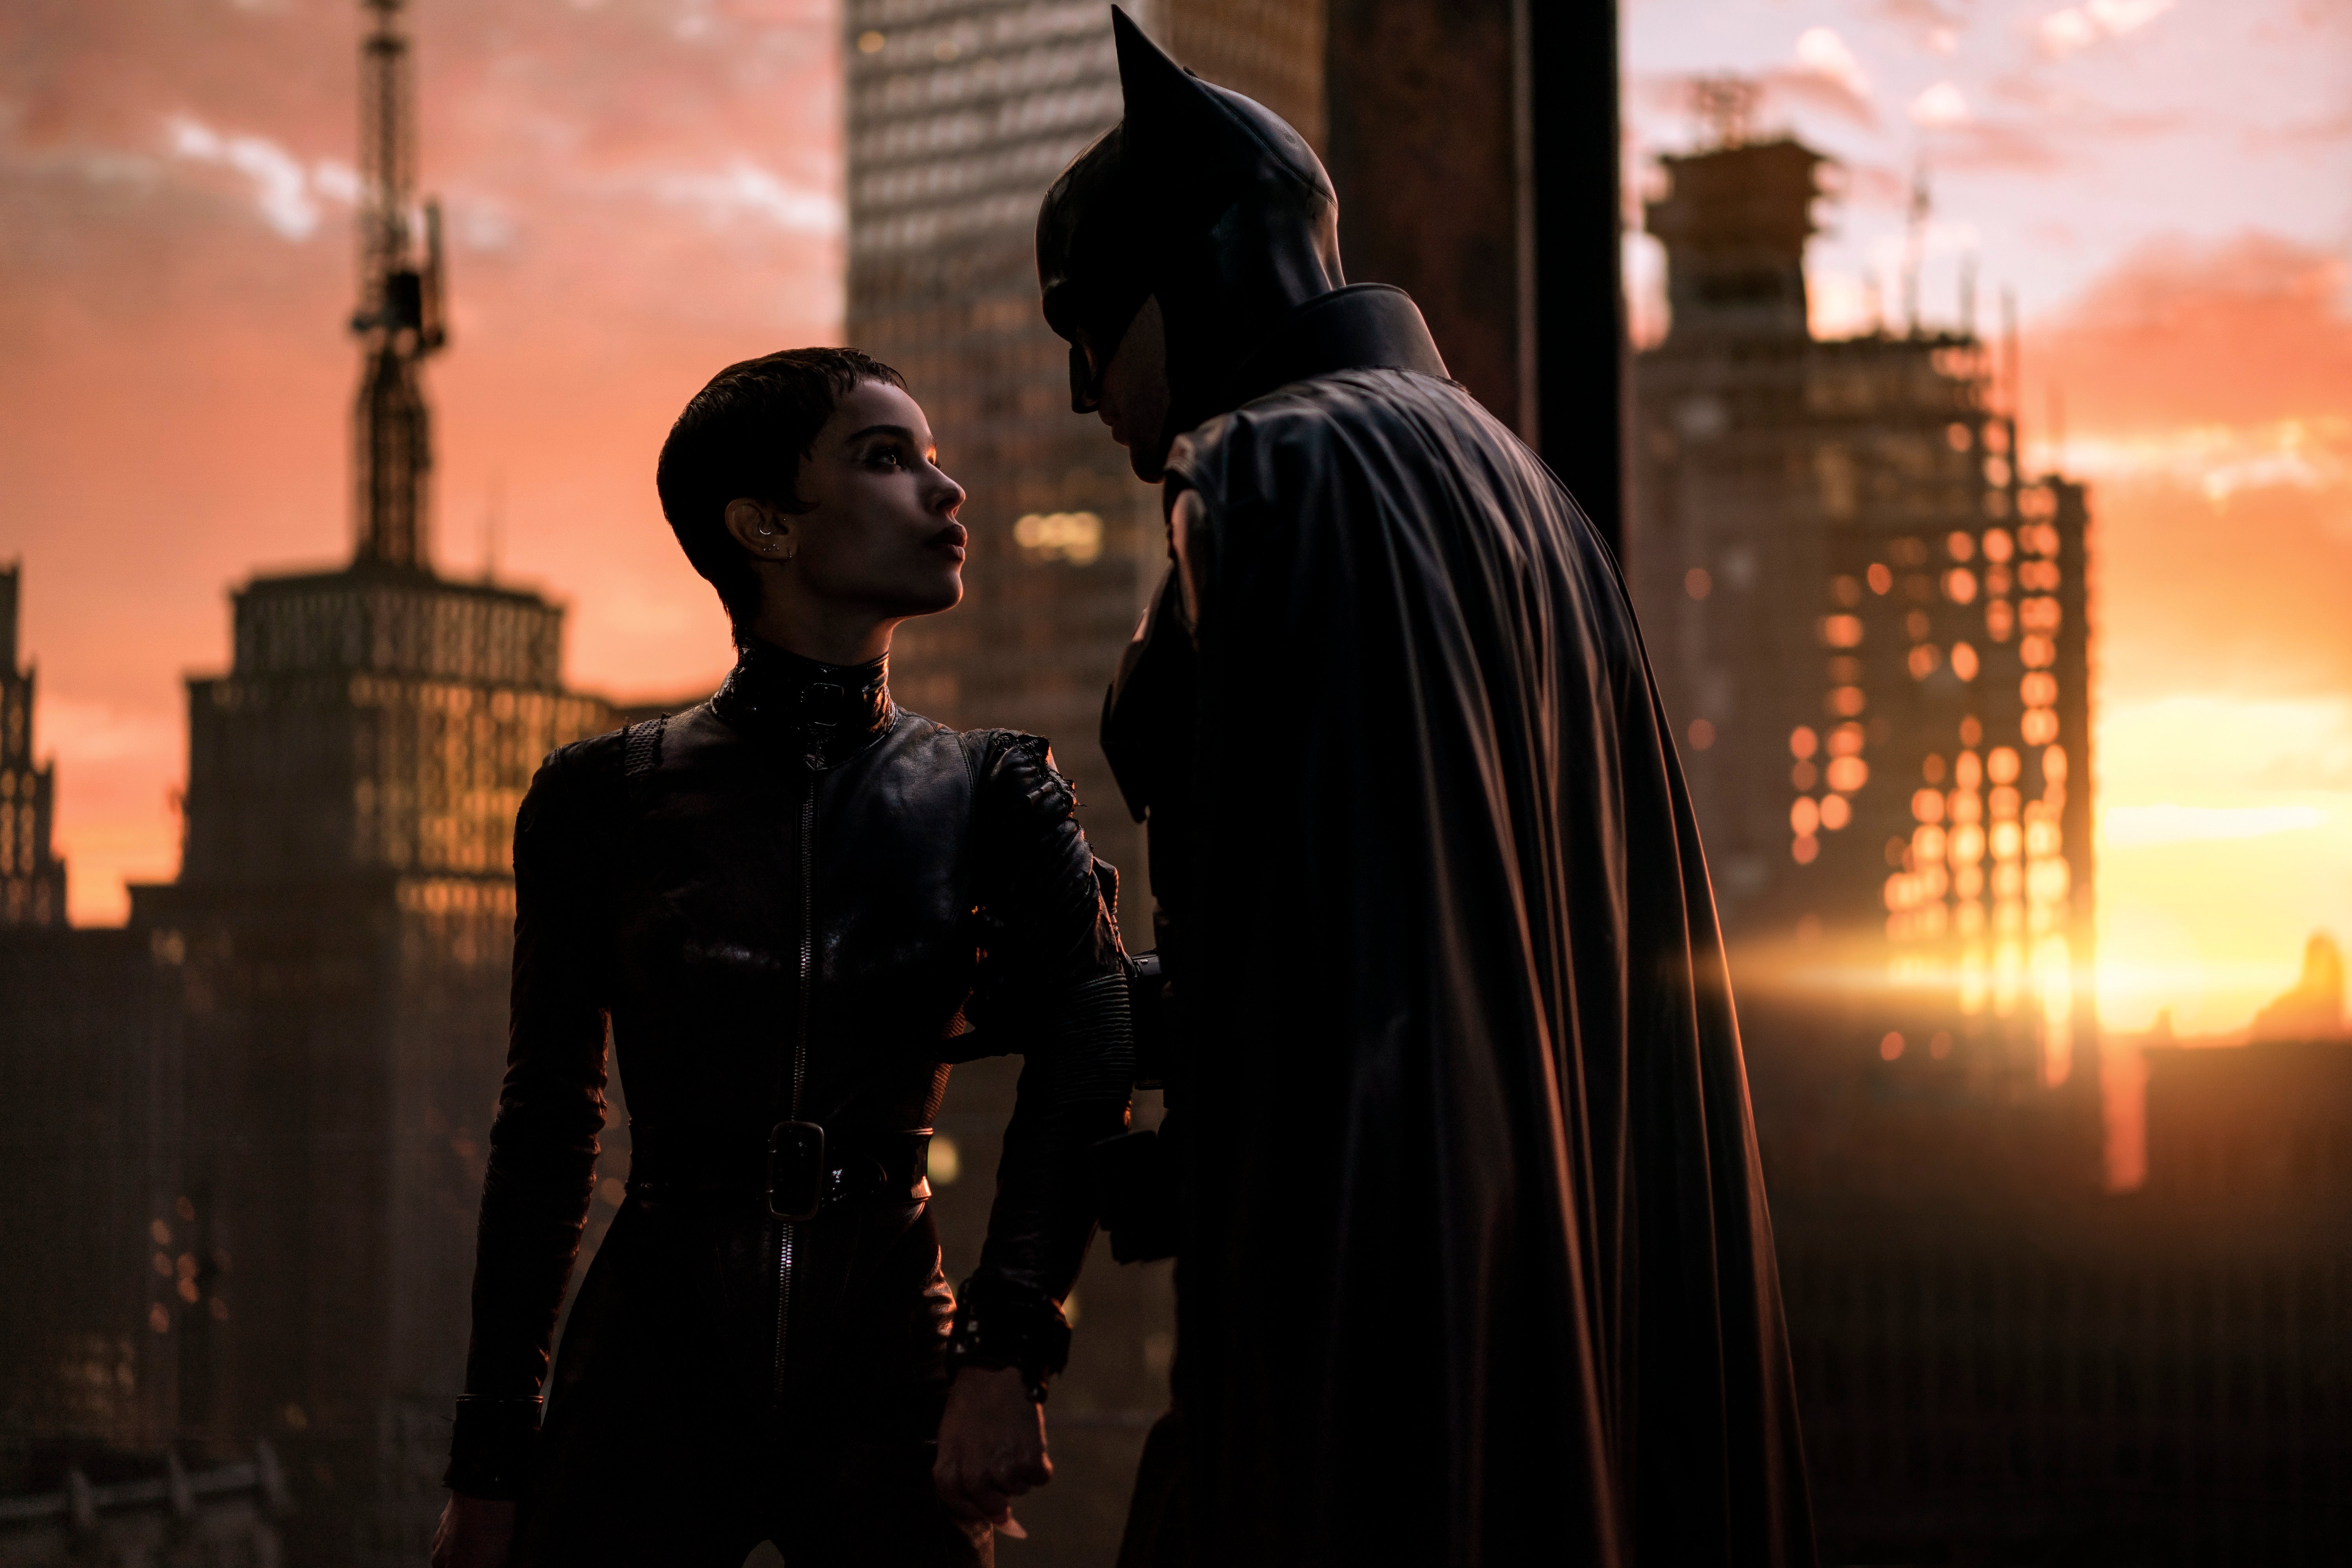 ‘The Batman’ is one of the year’s biggest films